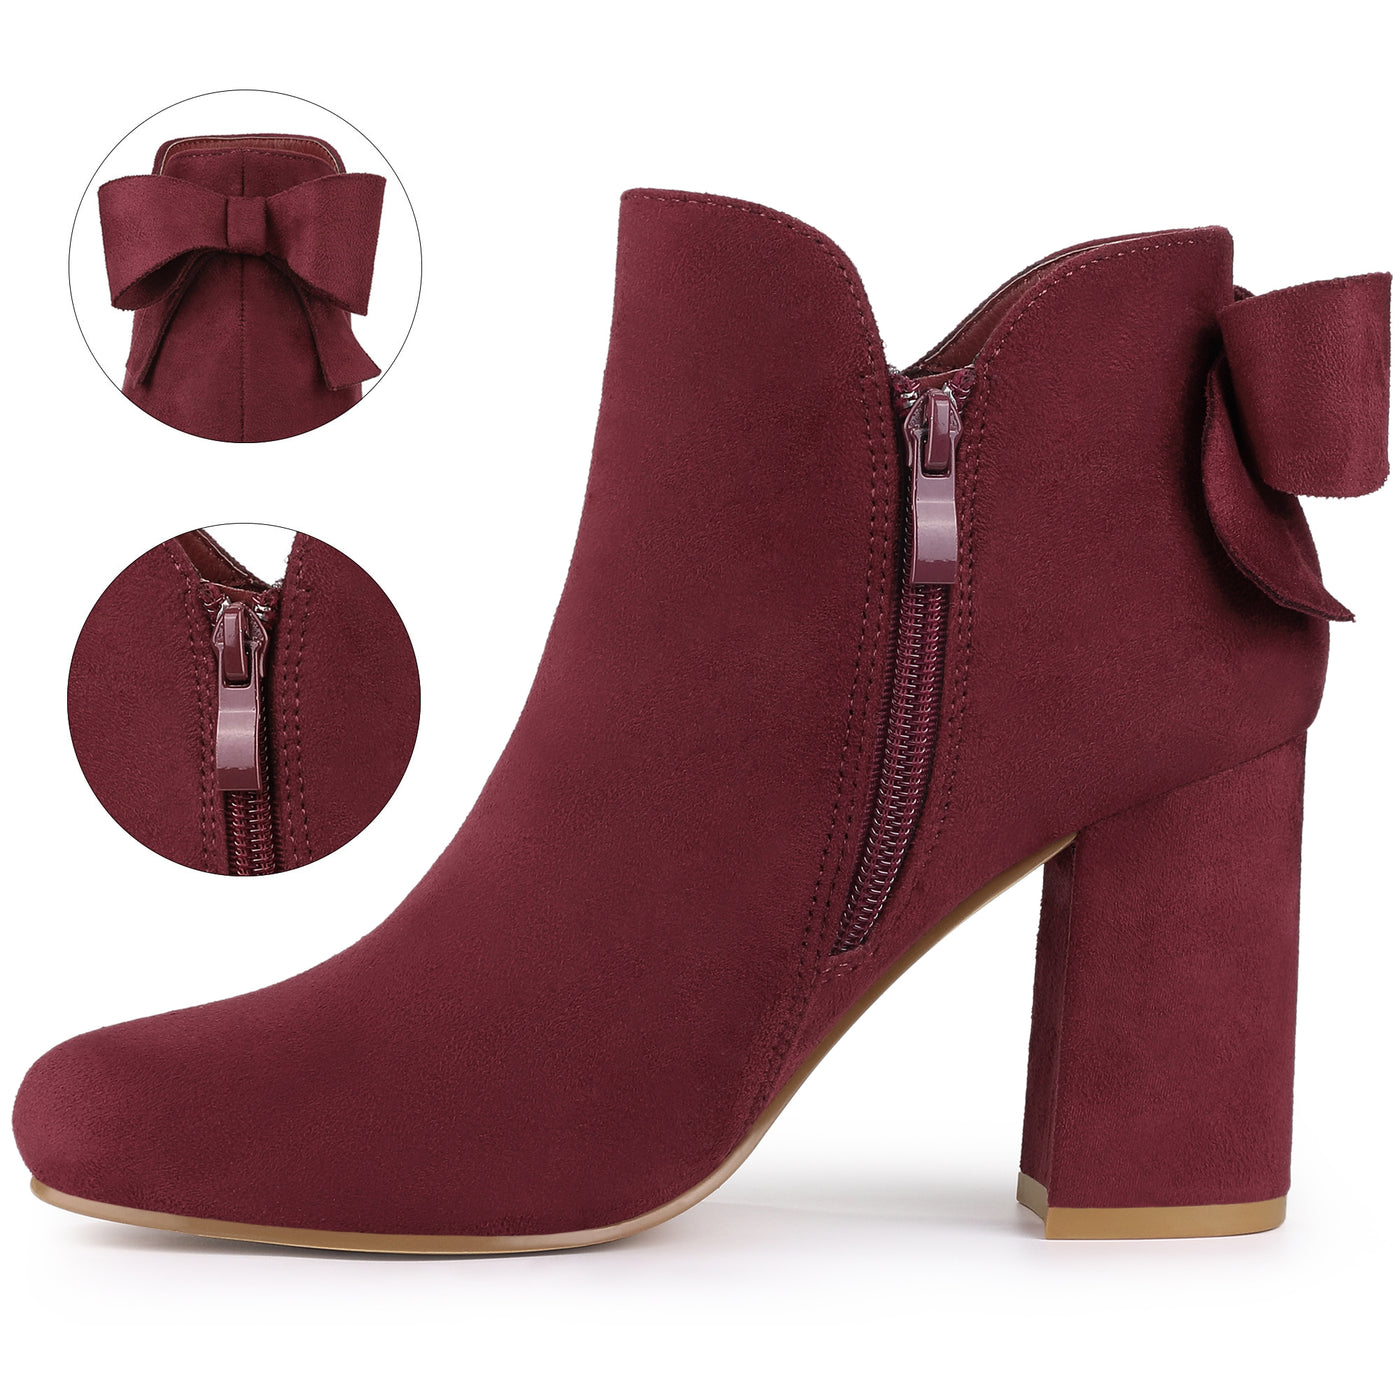 Allegra K Round Toe Bow Decor Chunky Heel Ankle Boots